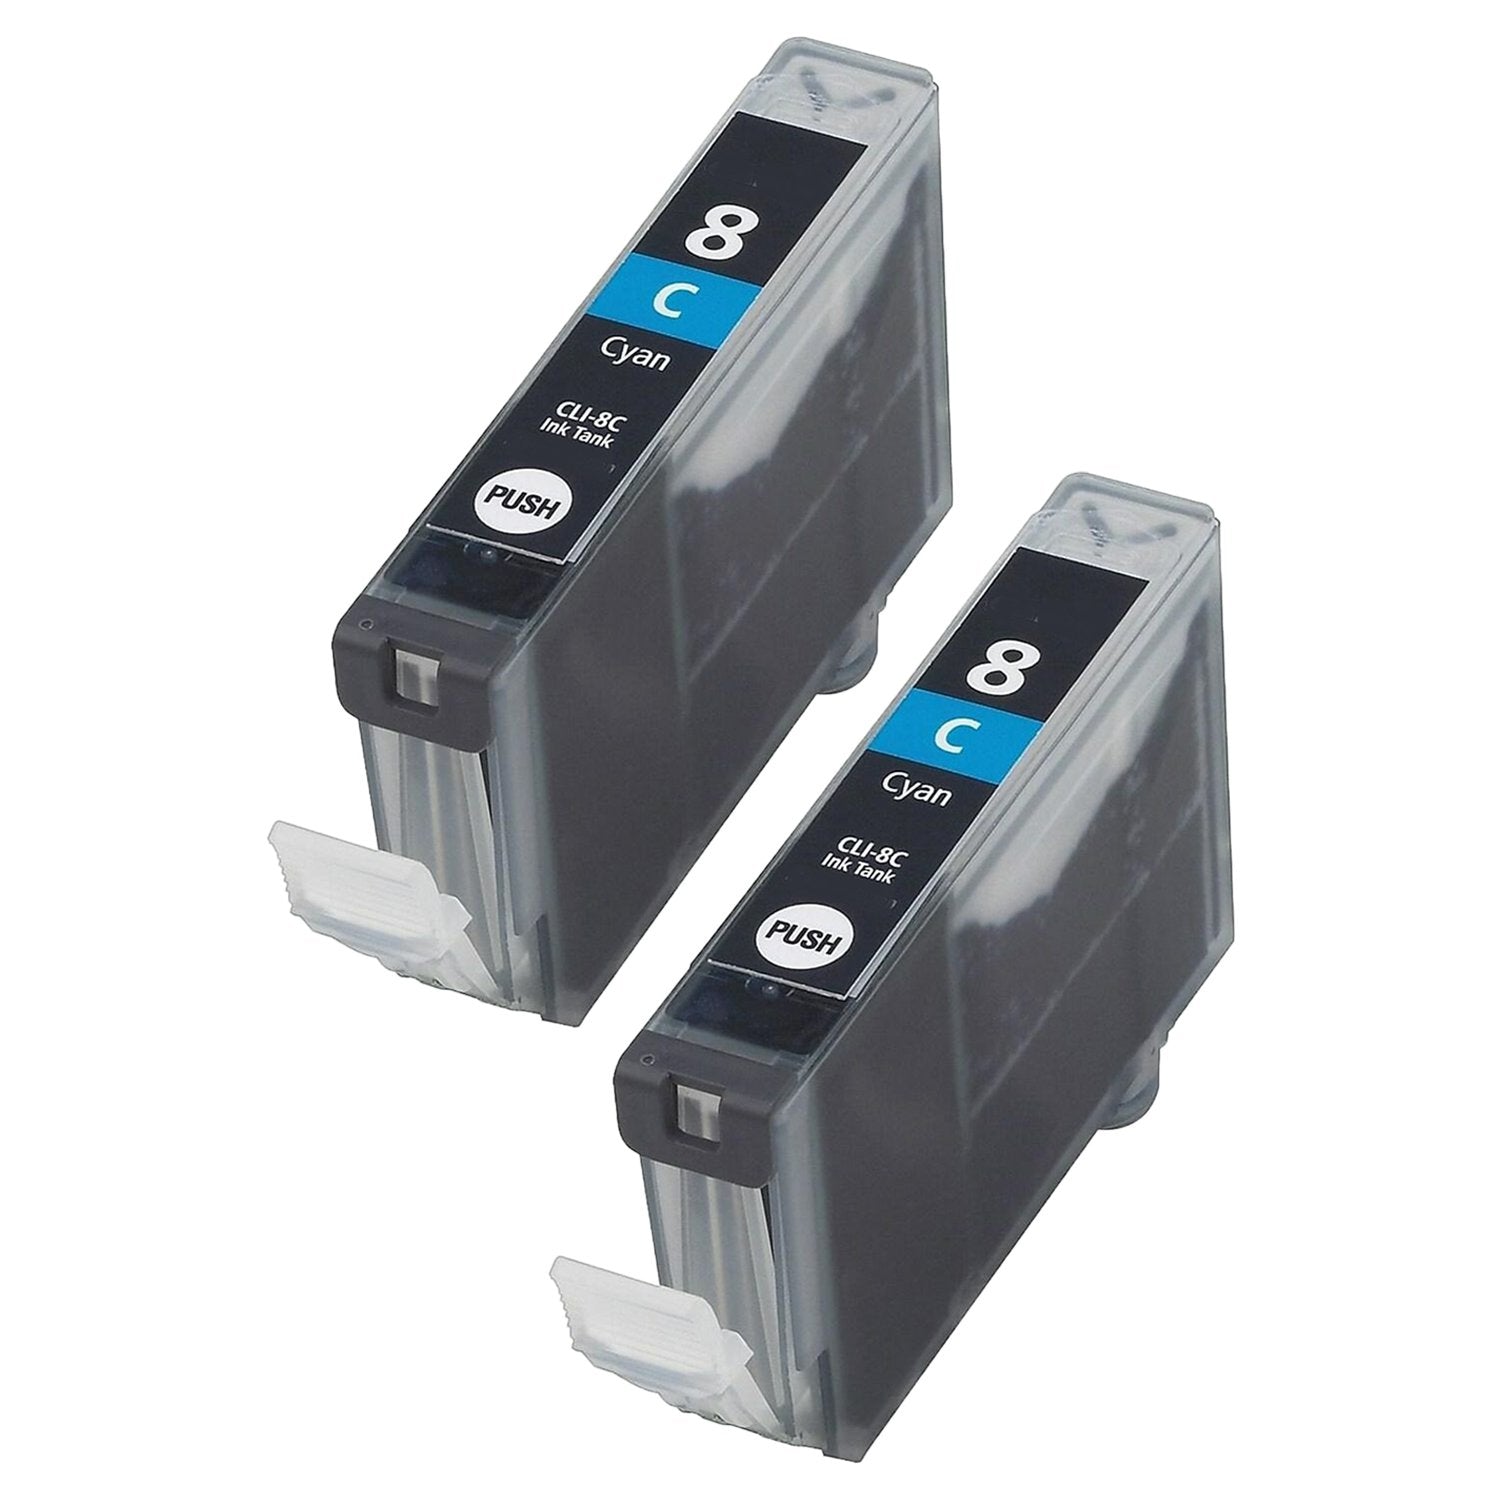 Absolute Toner Canon CLI-8C (0621B002) Compatible Cyan Ink Cartridges | Absolute Toner Canon Ink Cartridges